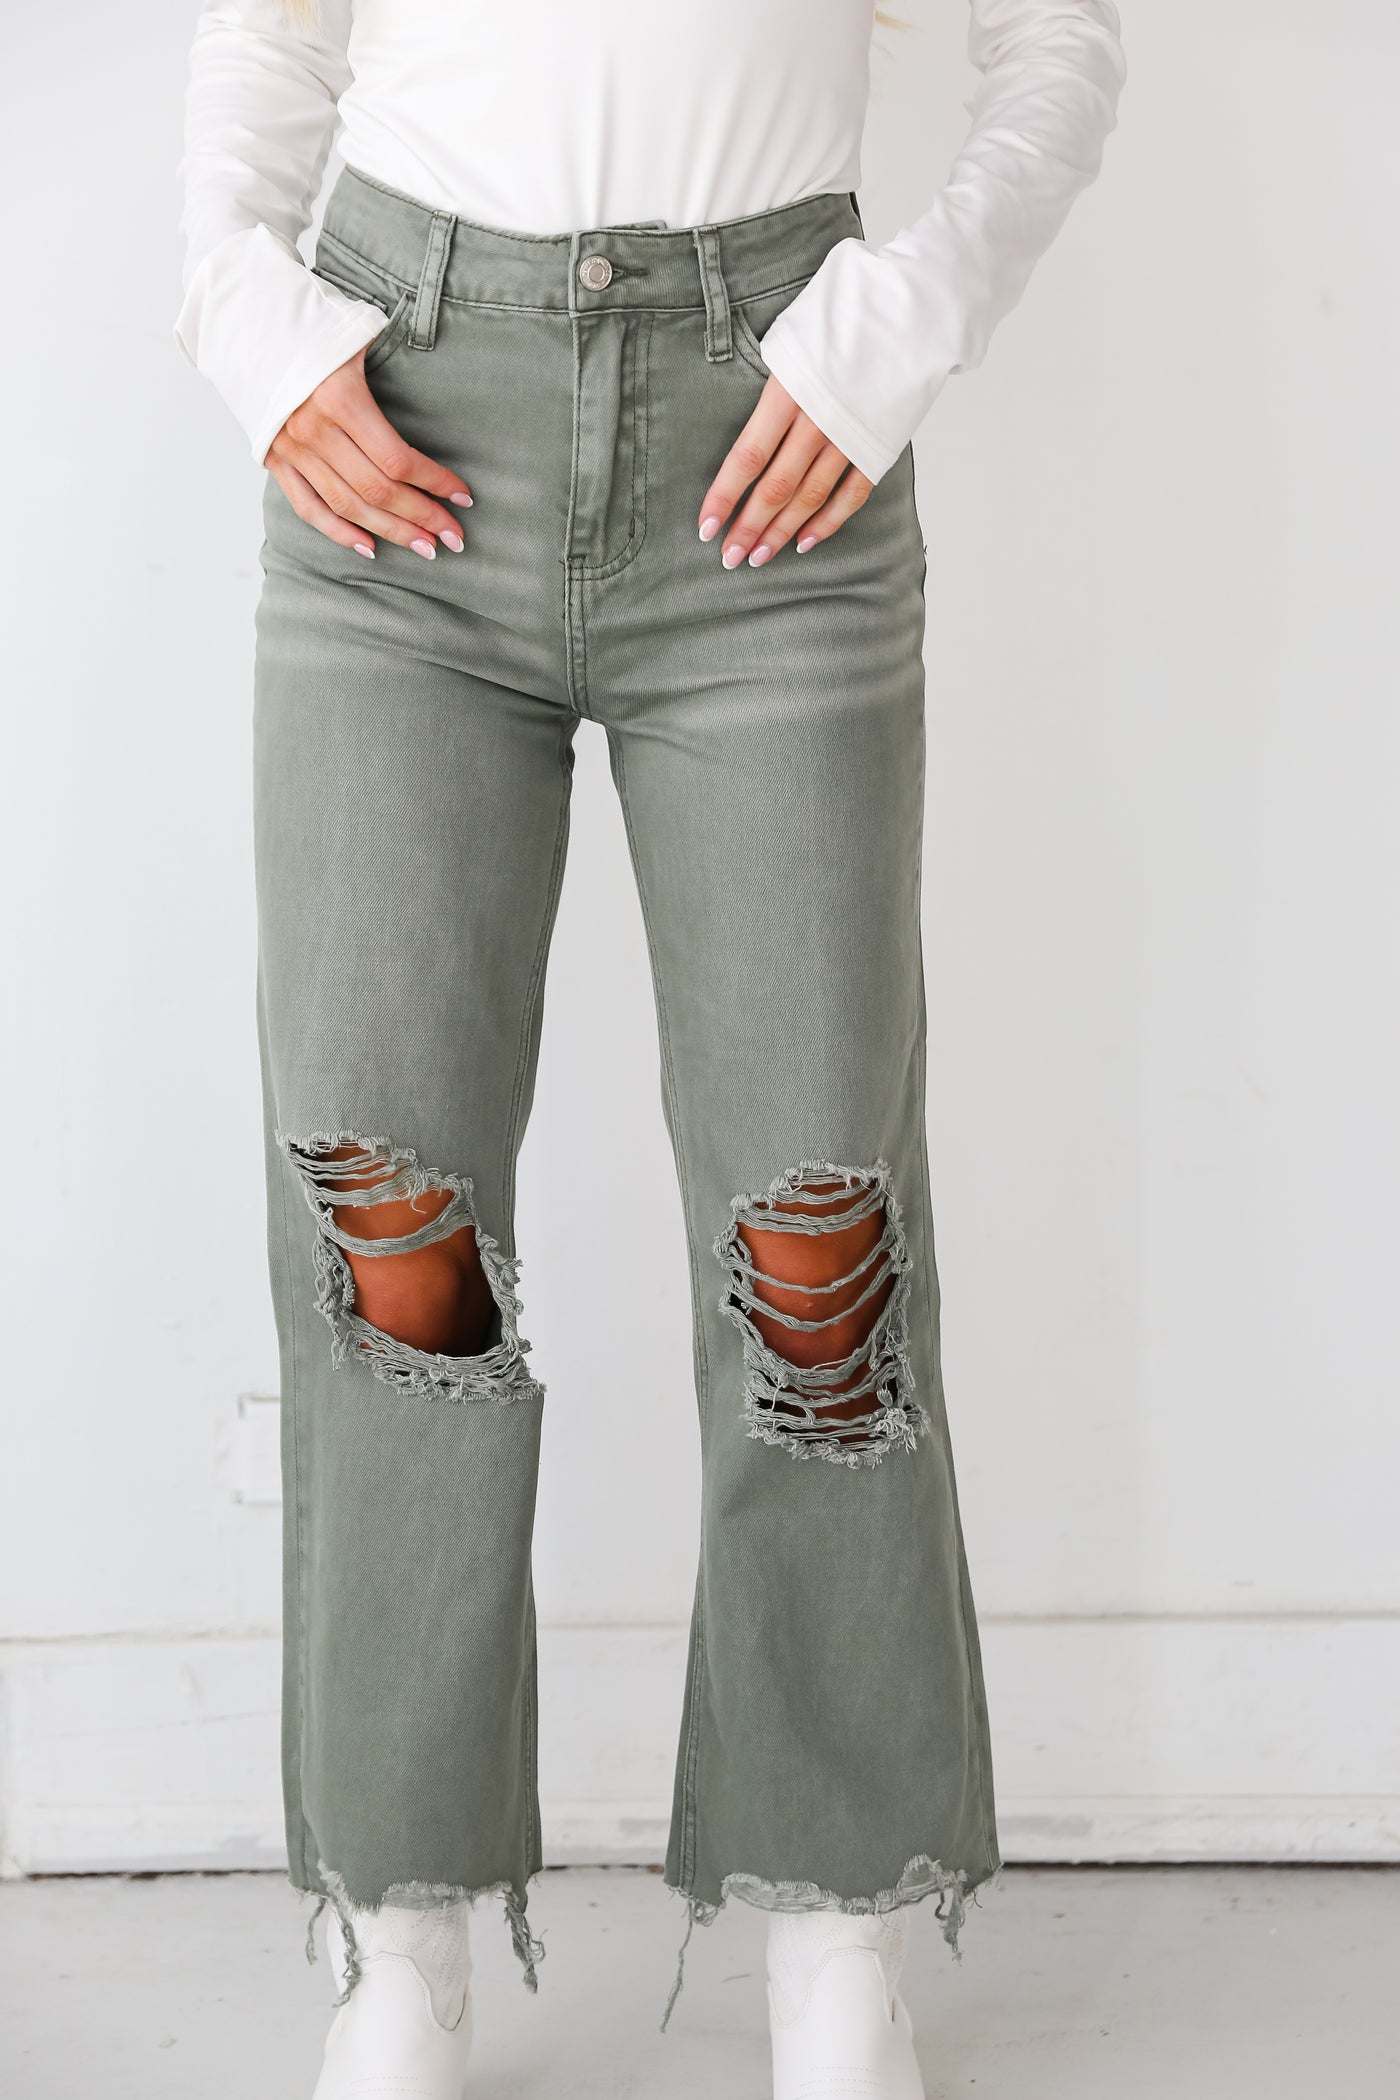 Army Green 90s Vintage Crop Flare Jeans close up